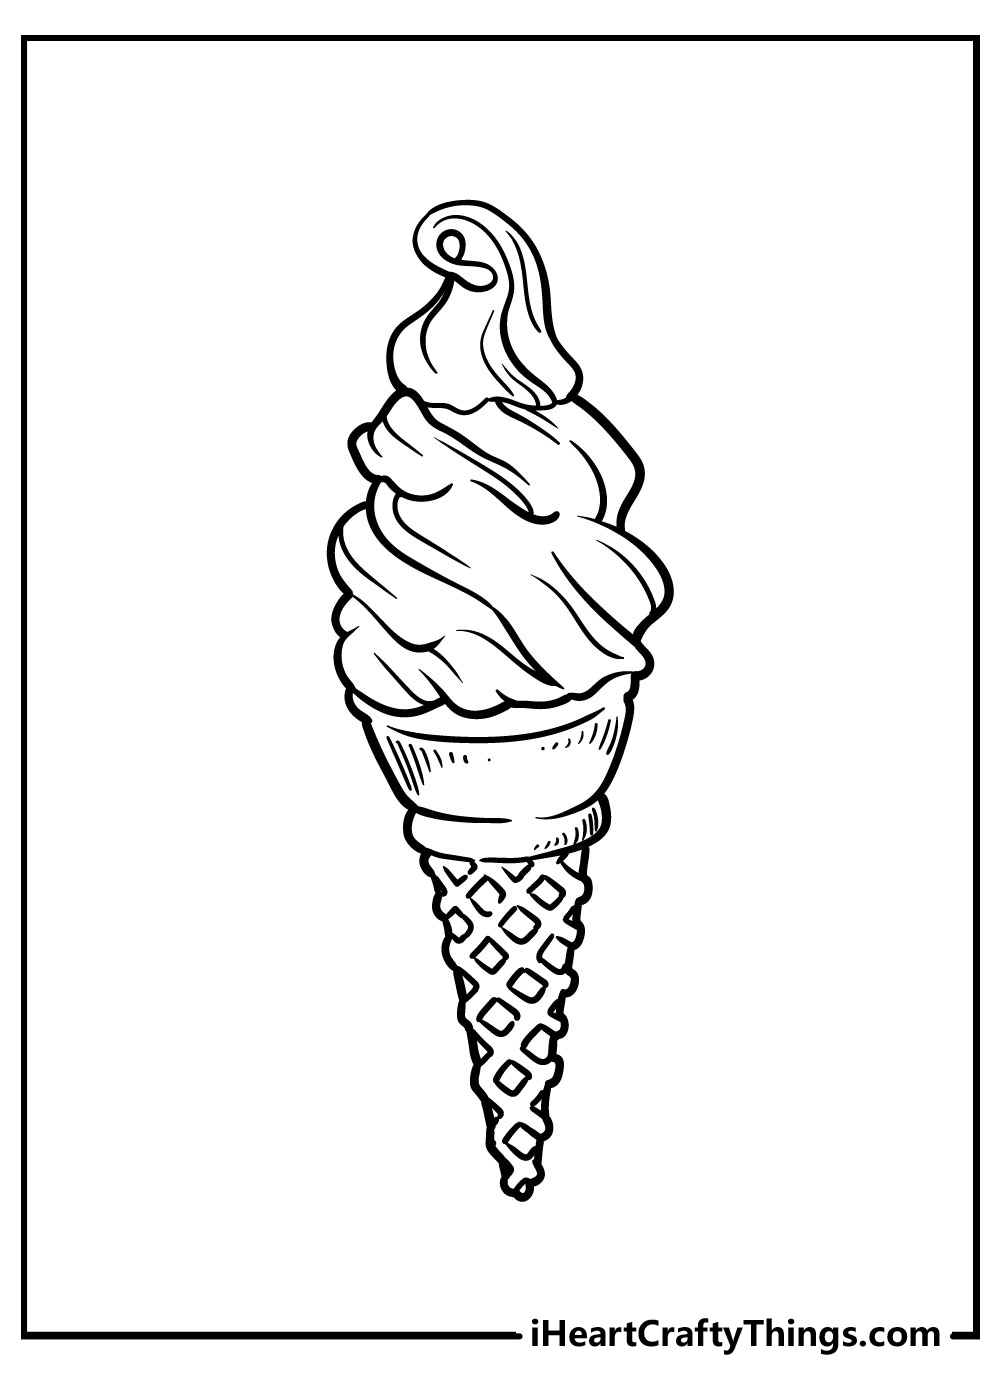 Ice cream coloring pages free printables